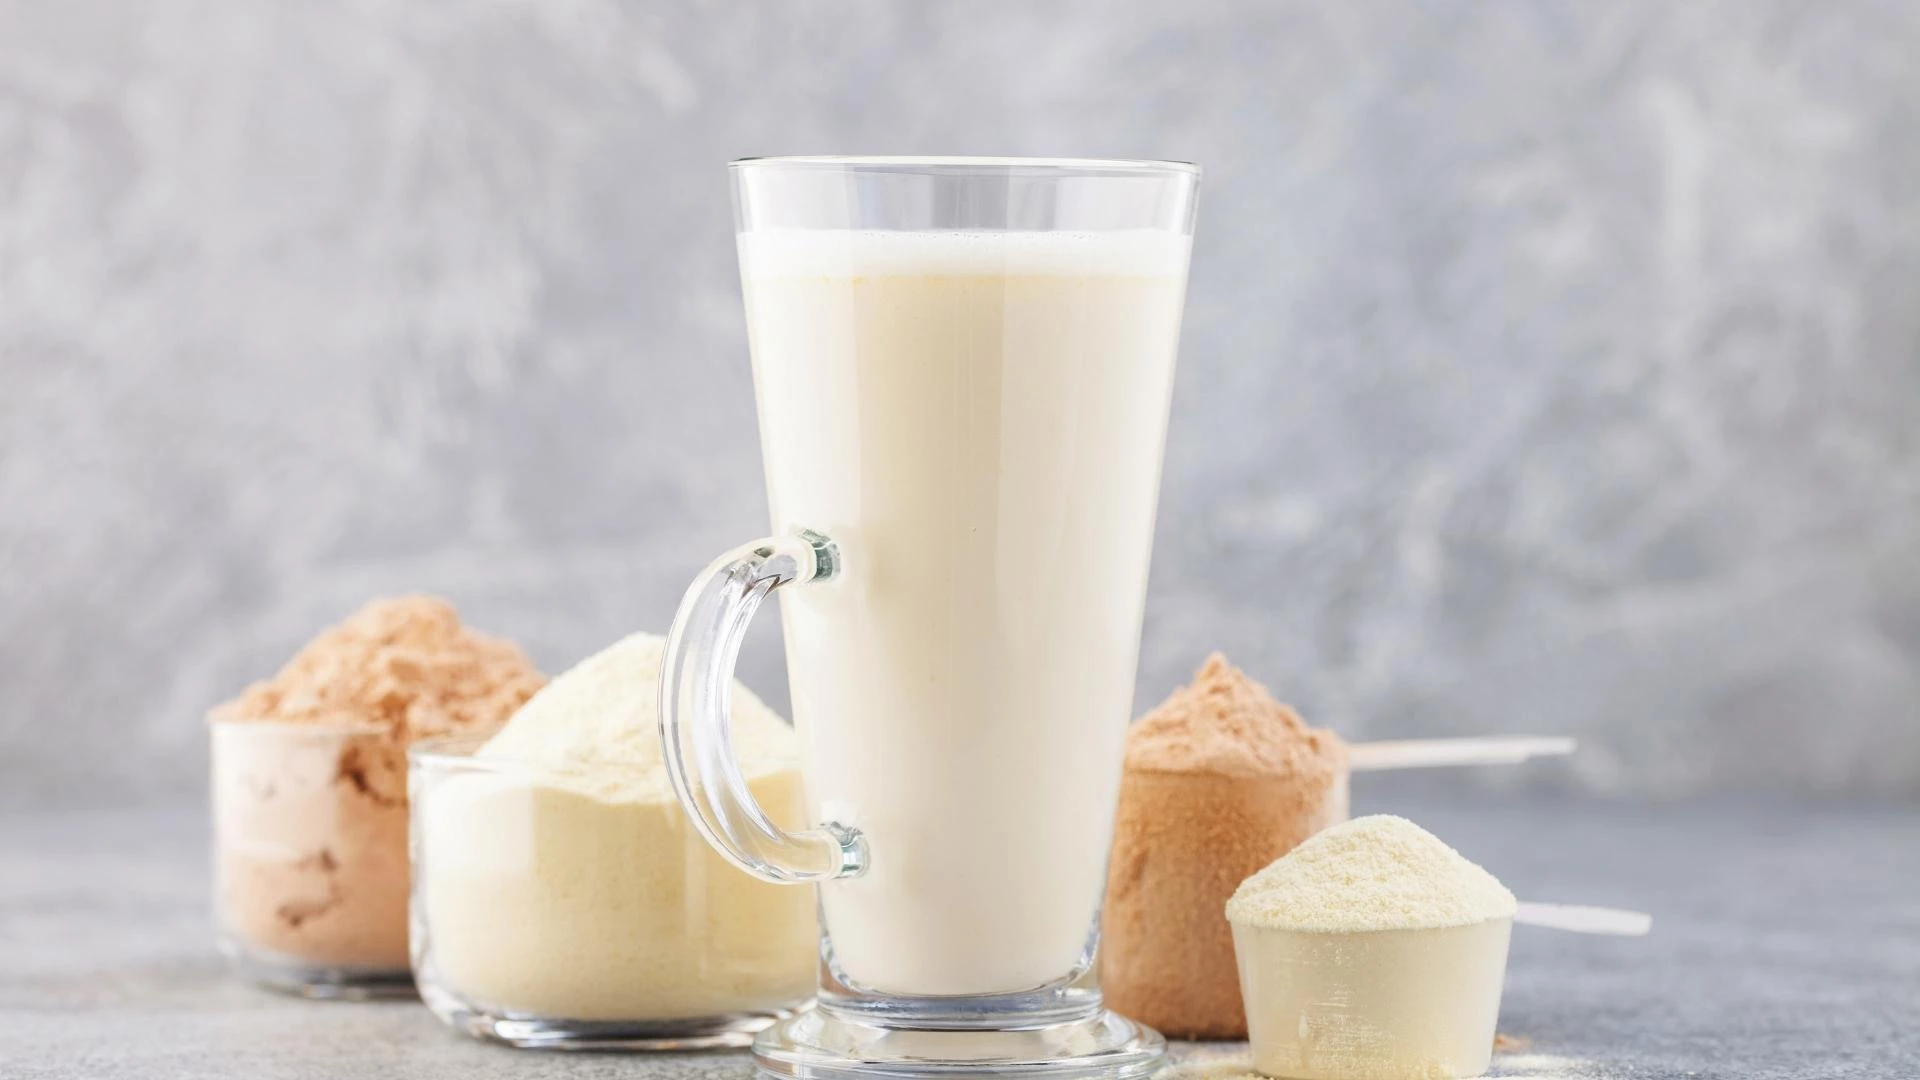 What Is a Protein Powder Diet? Does Protein Powder Help You Lose Weight?